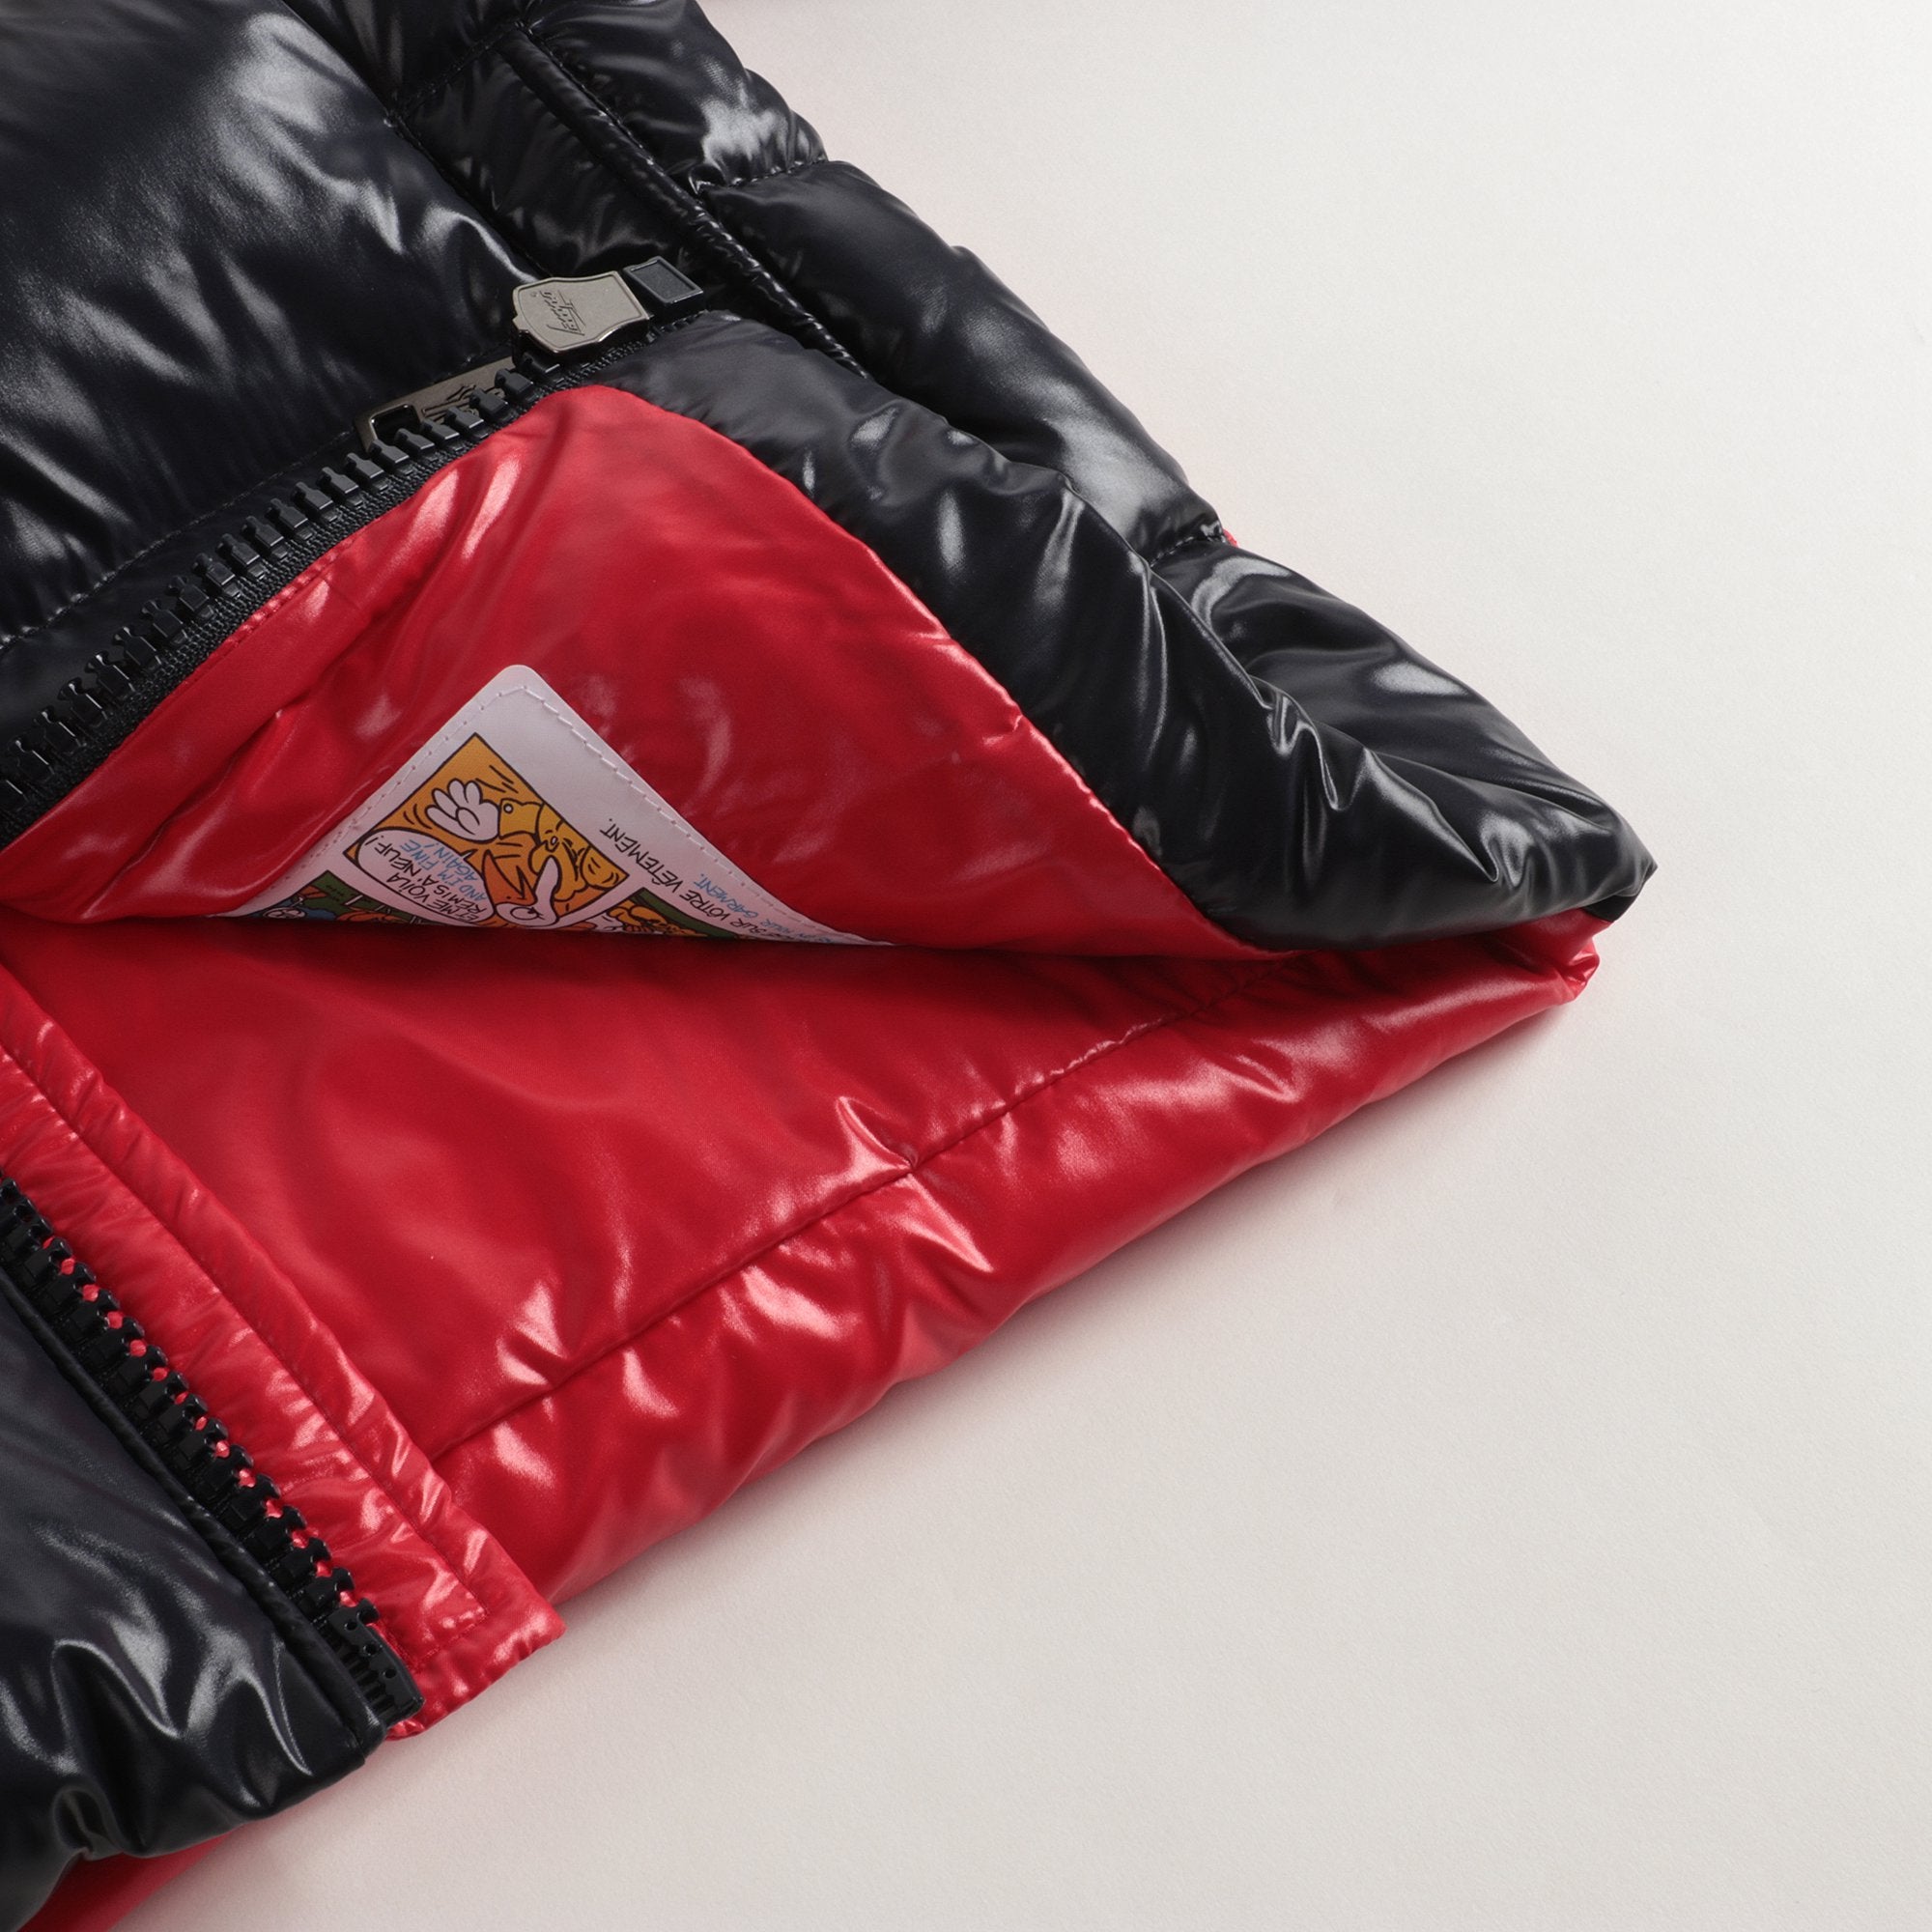 Boys Red "FEBREGE" Padded Down Puffer Jacket